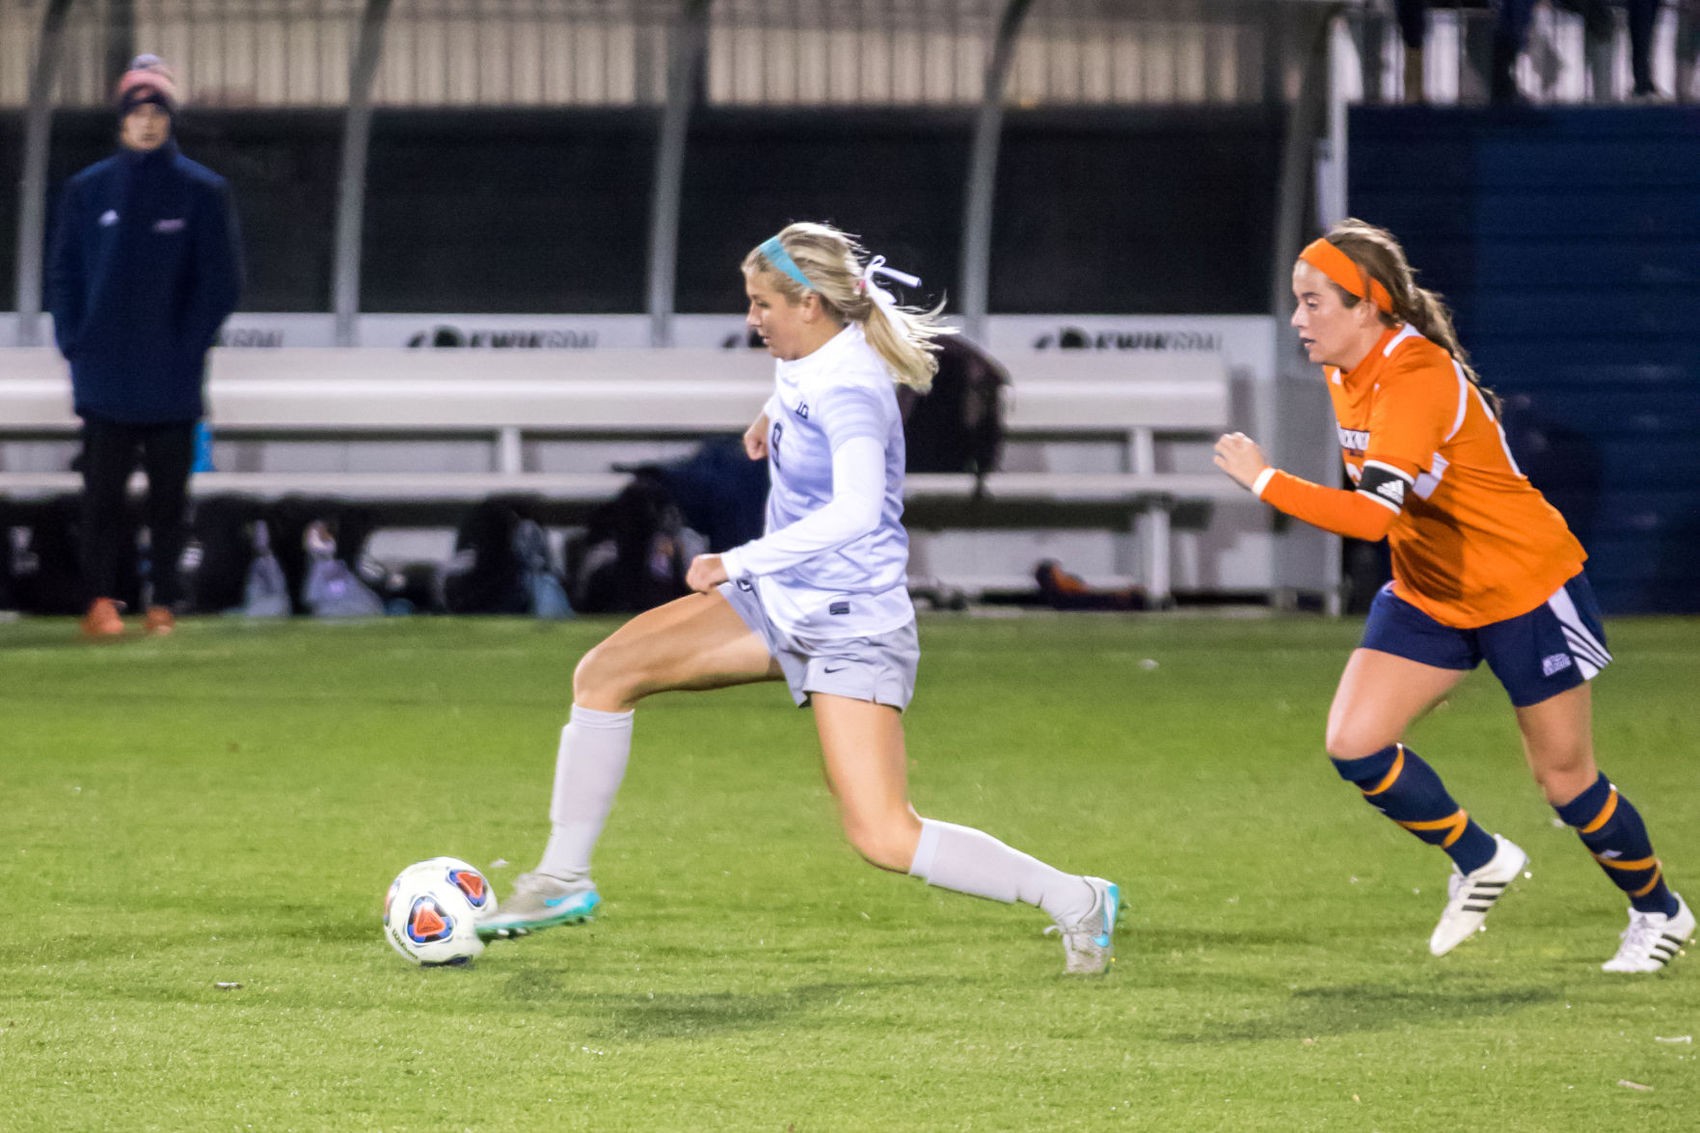 Two Penn State women's soccer players selected in National Women's